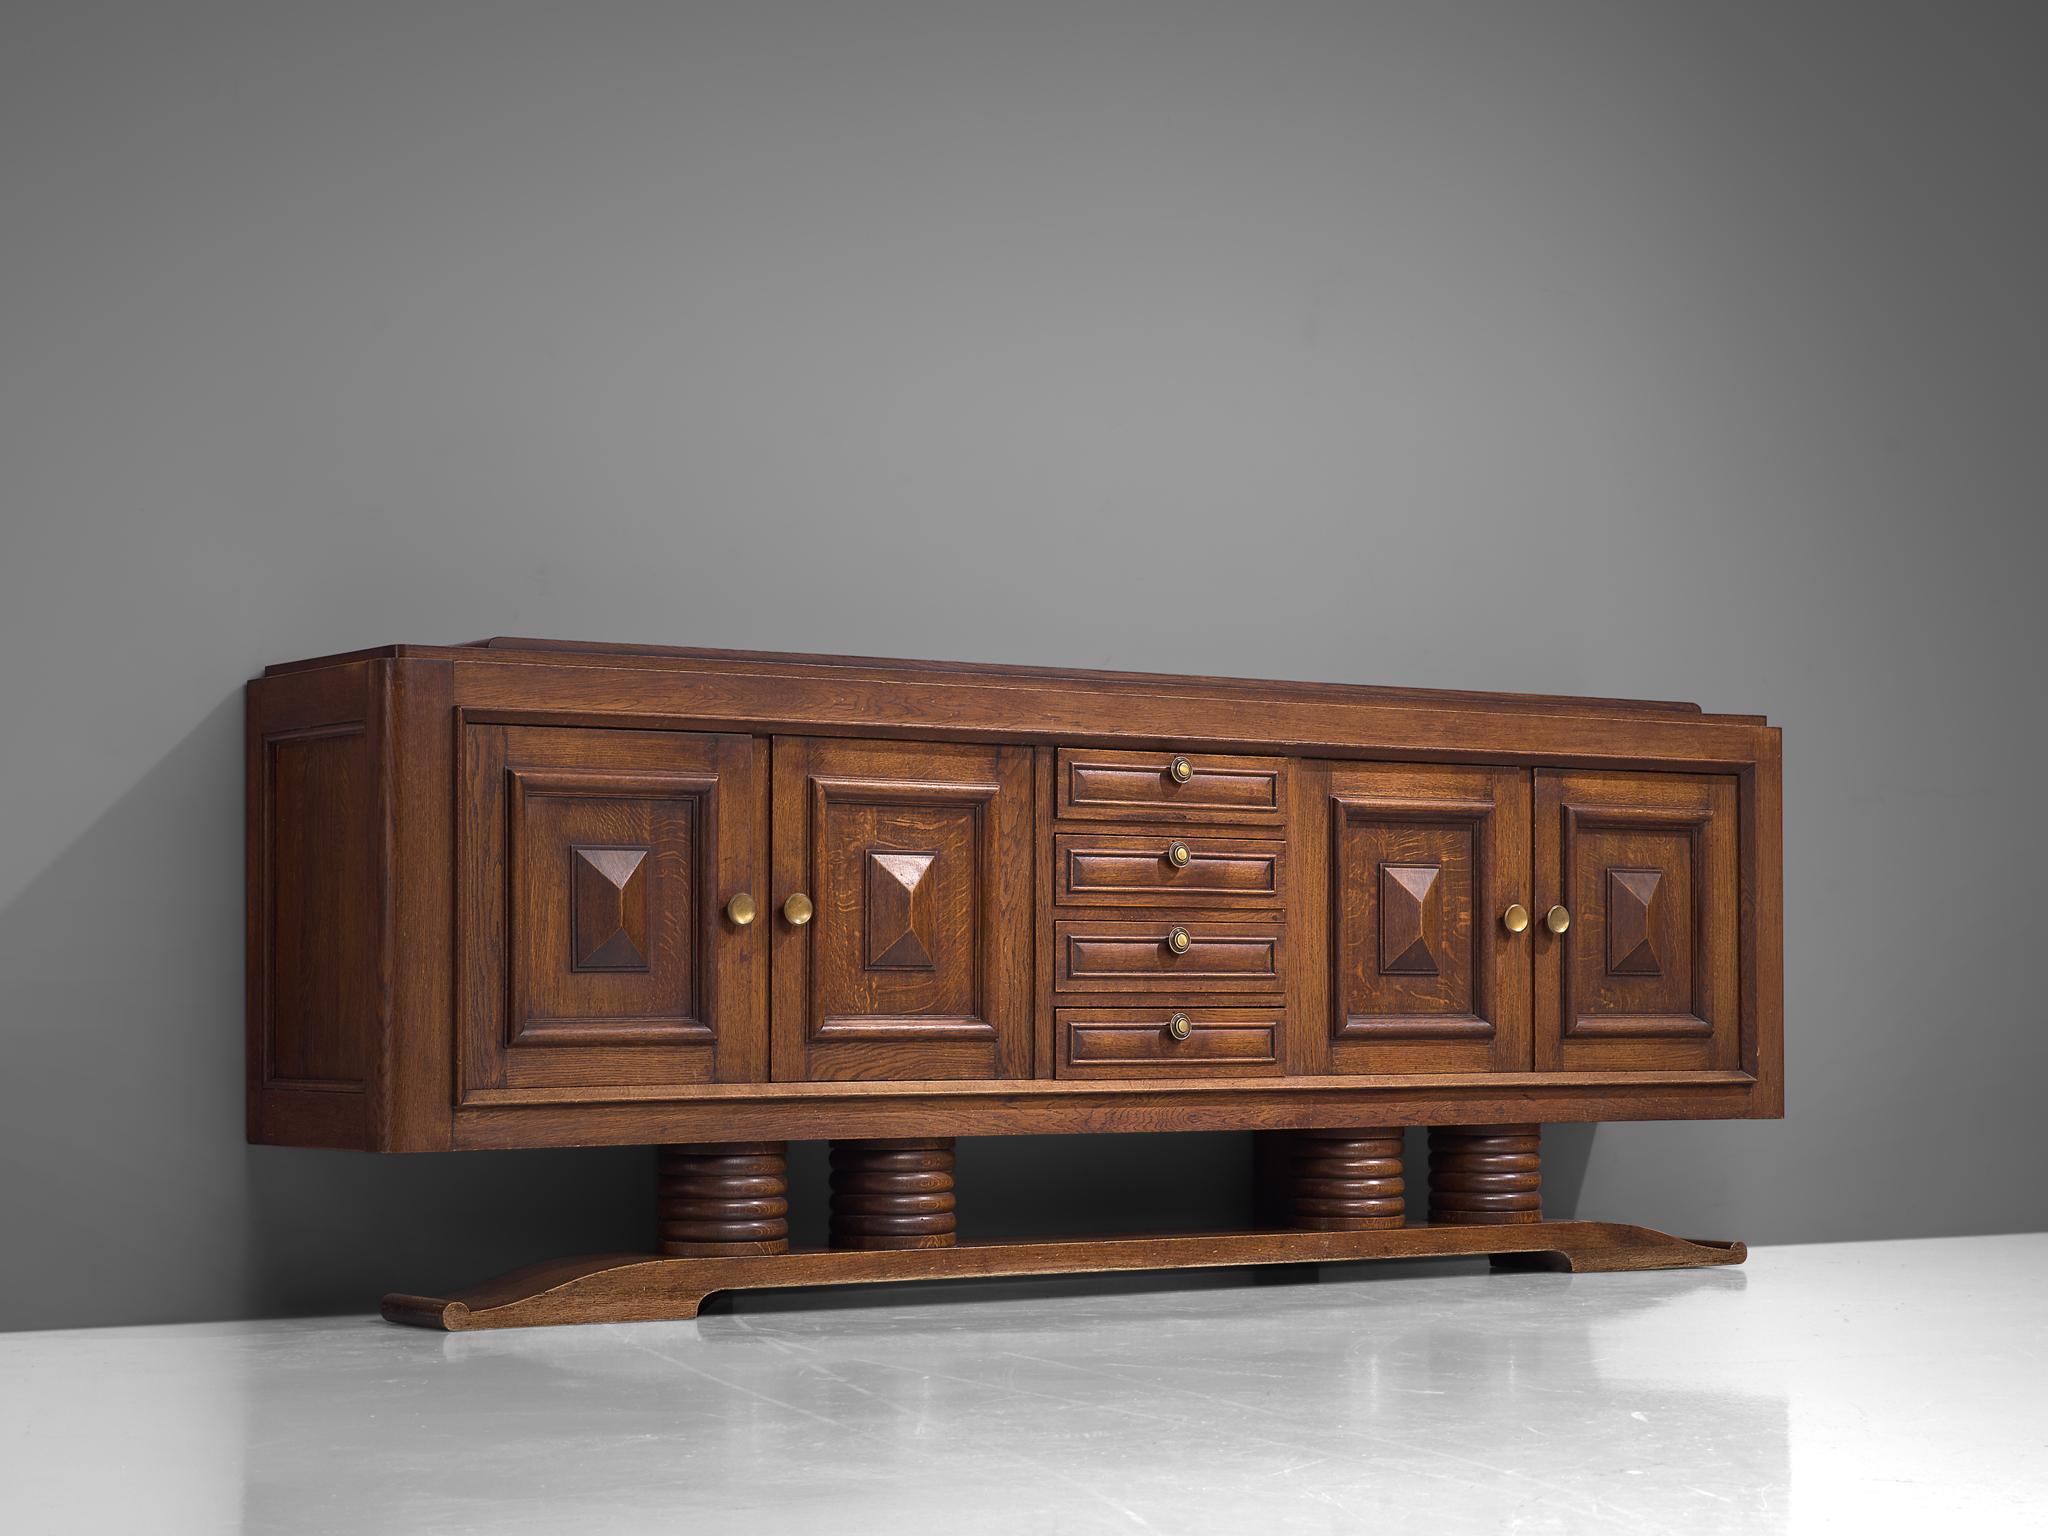 Charles Dudouyt, sideboard, oak and brass, France, 1930s

Sturdy credenza in oak with graphical door panels. This four-door sideboard is equipped with several shelves and drawers which provide plenty of storage space. The shelves are beautifully